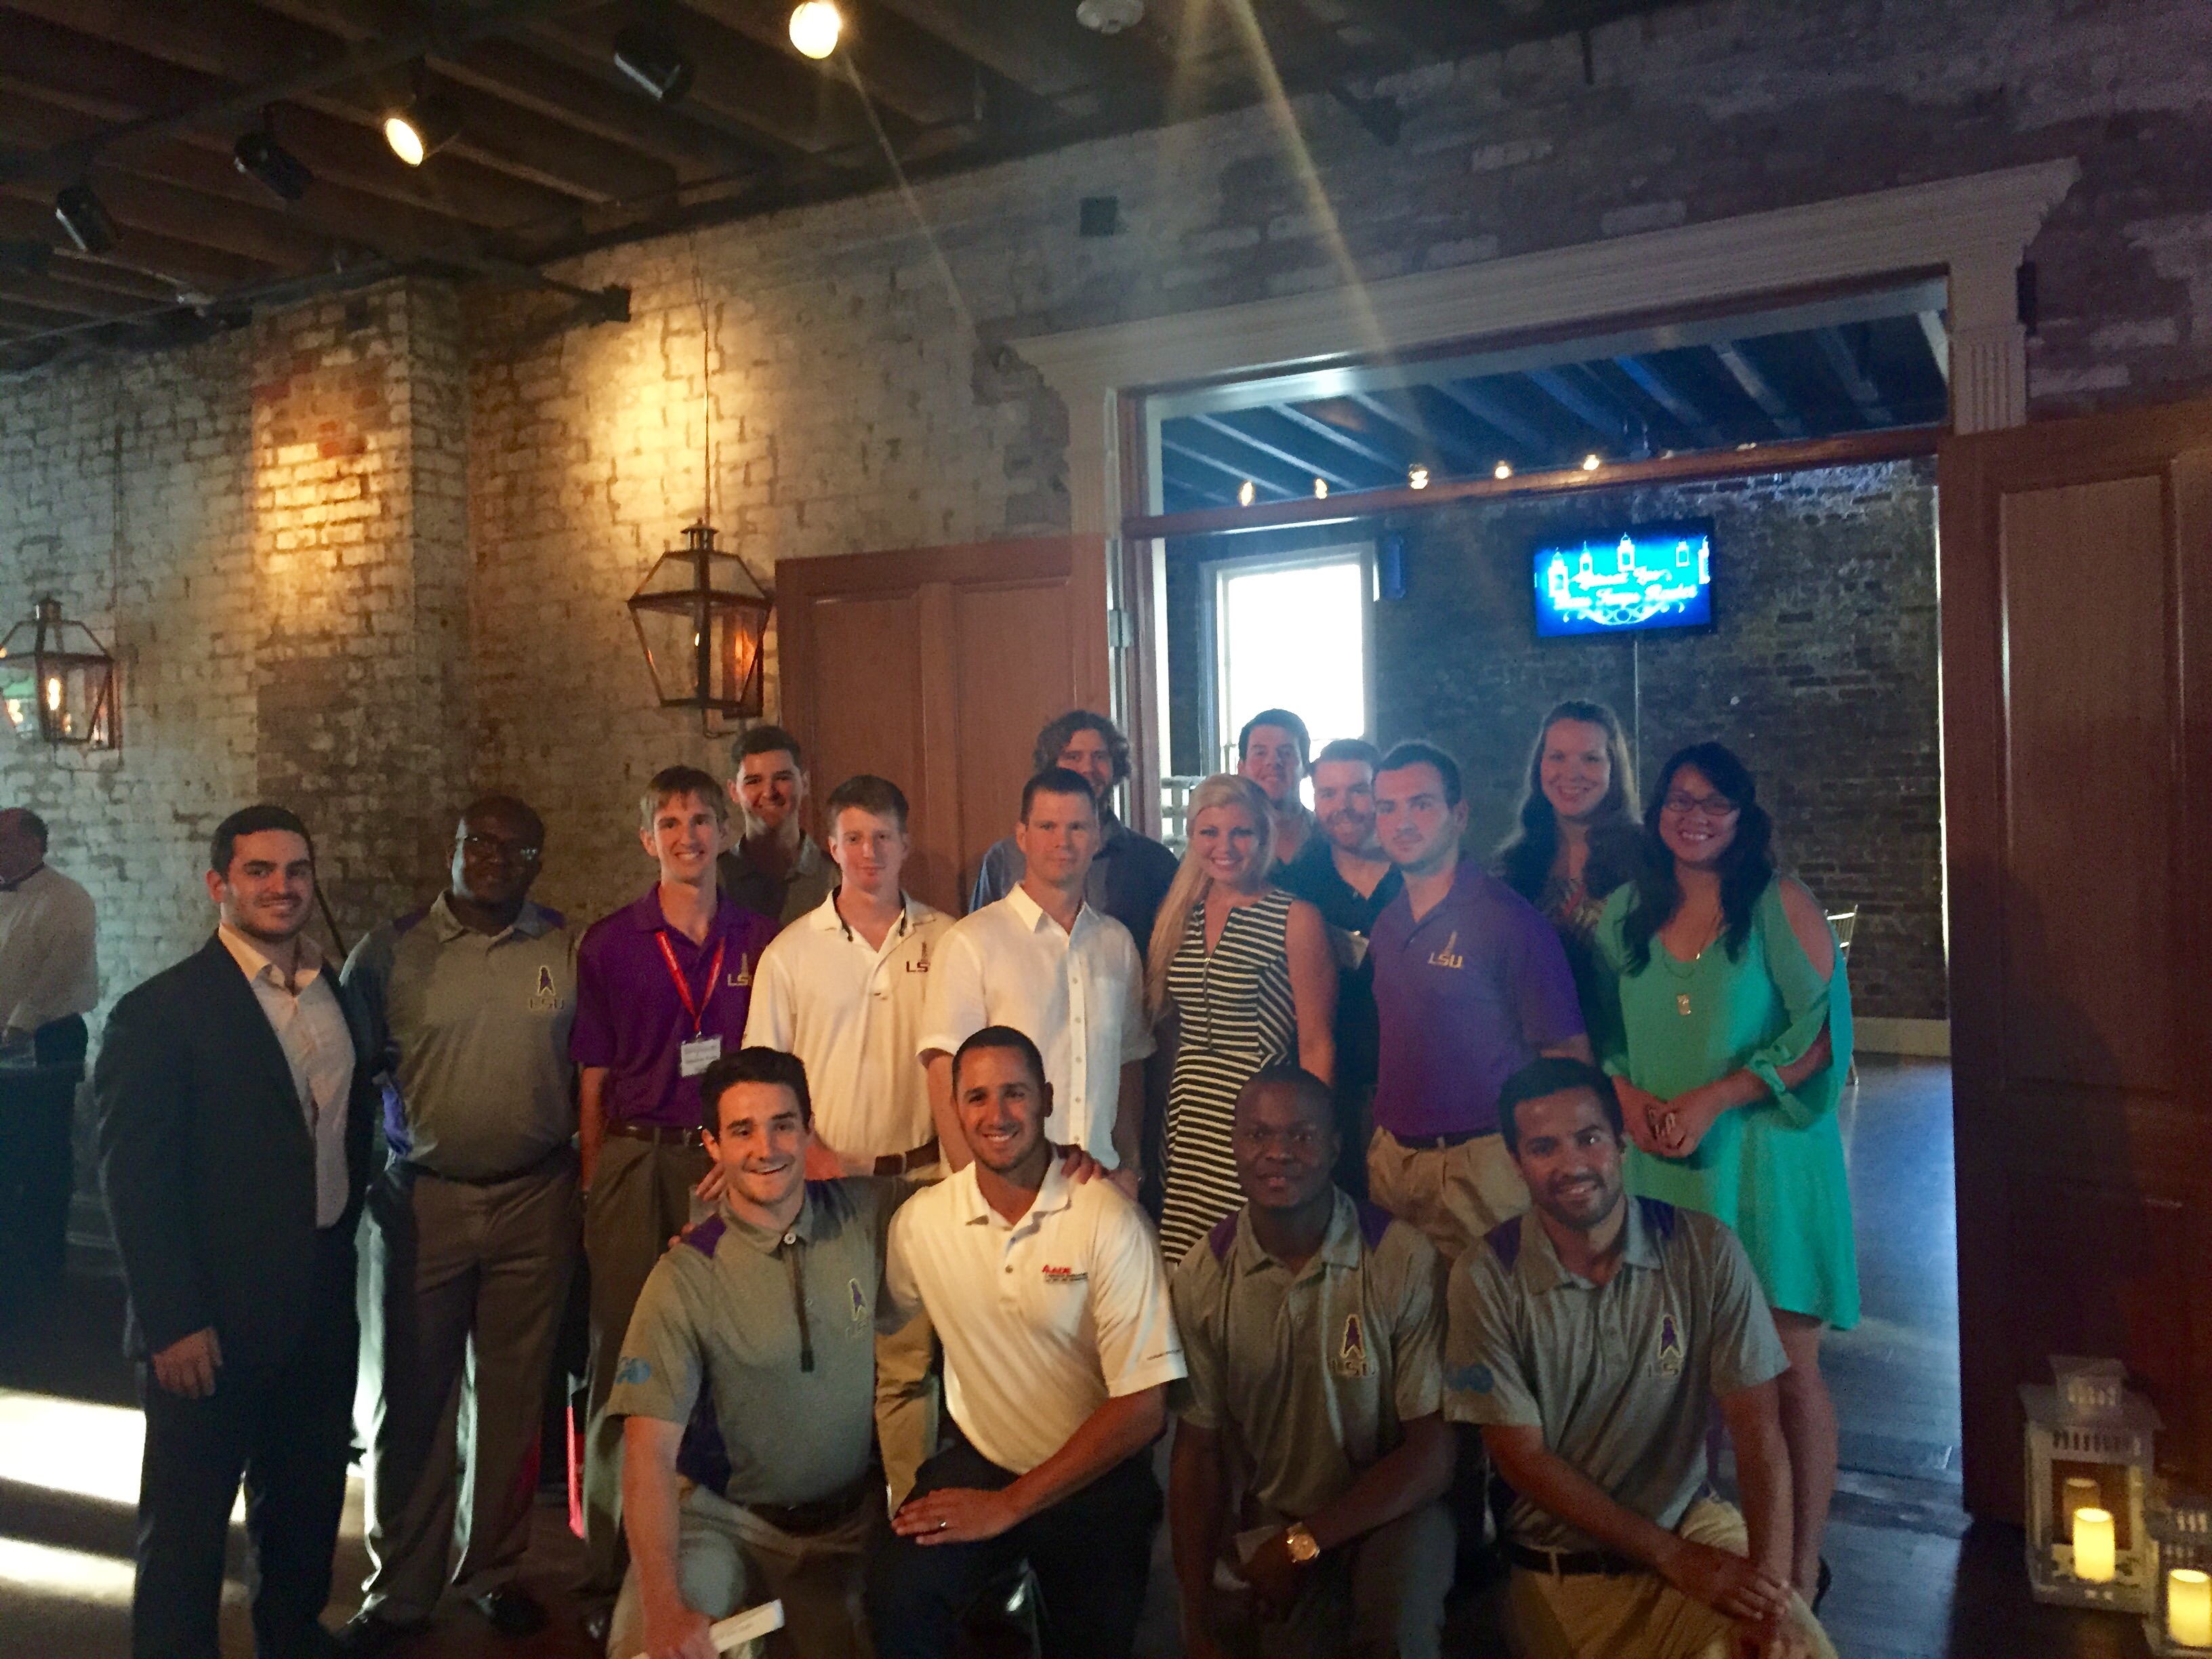 LSU SPE students attend the 19th annual Deepwater Technical Symposium and volunteer at the Charity Gala